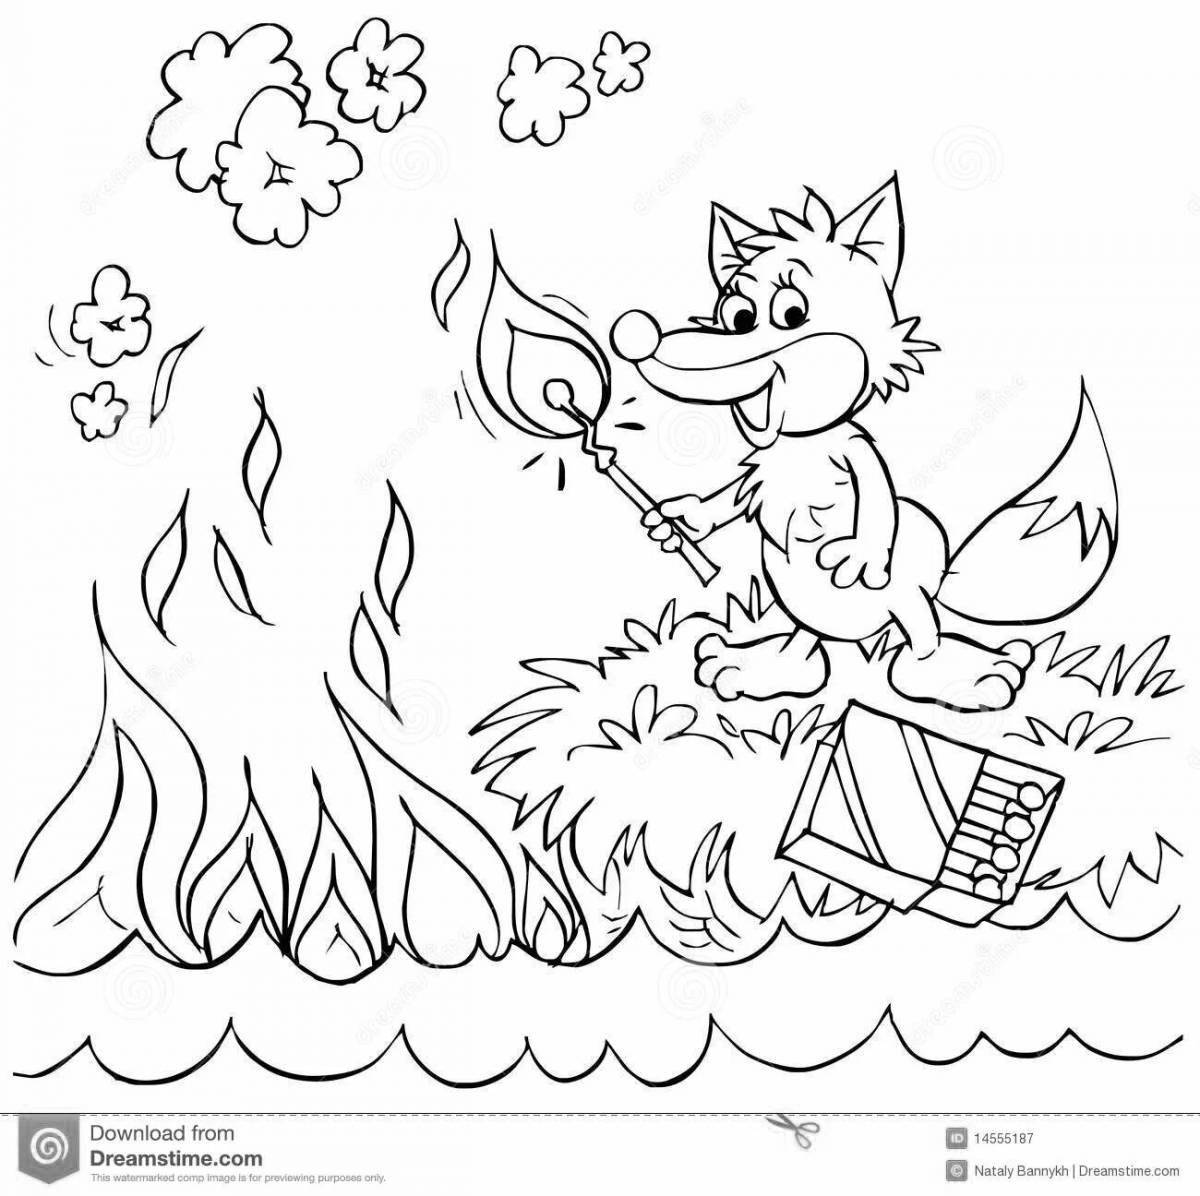 Lit forest fire coloring page